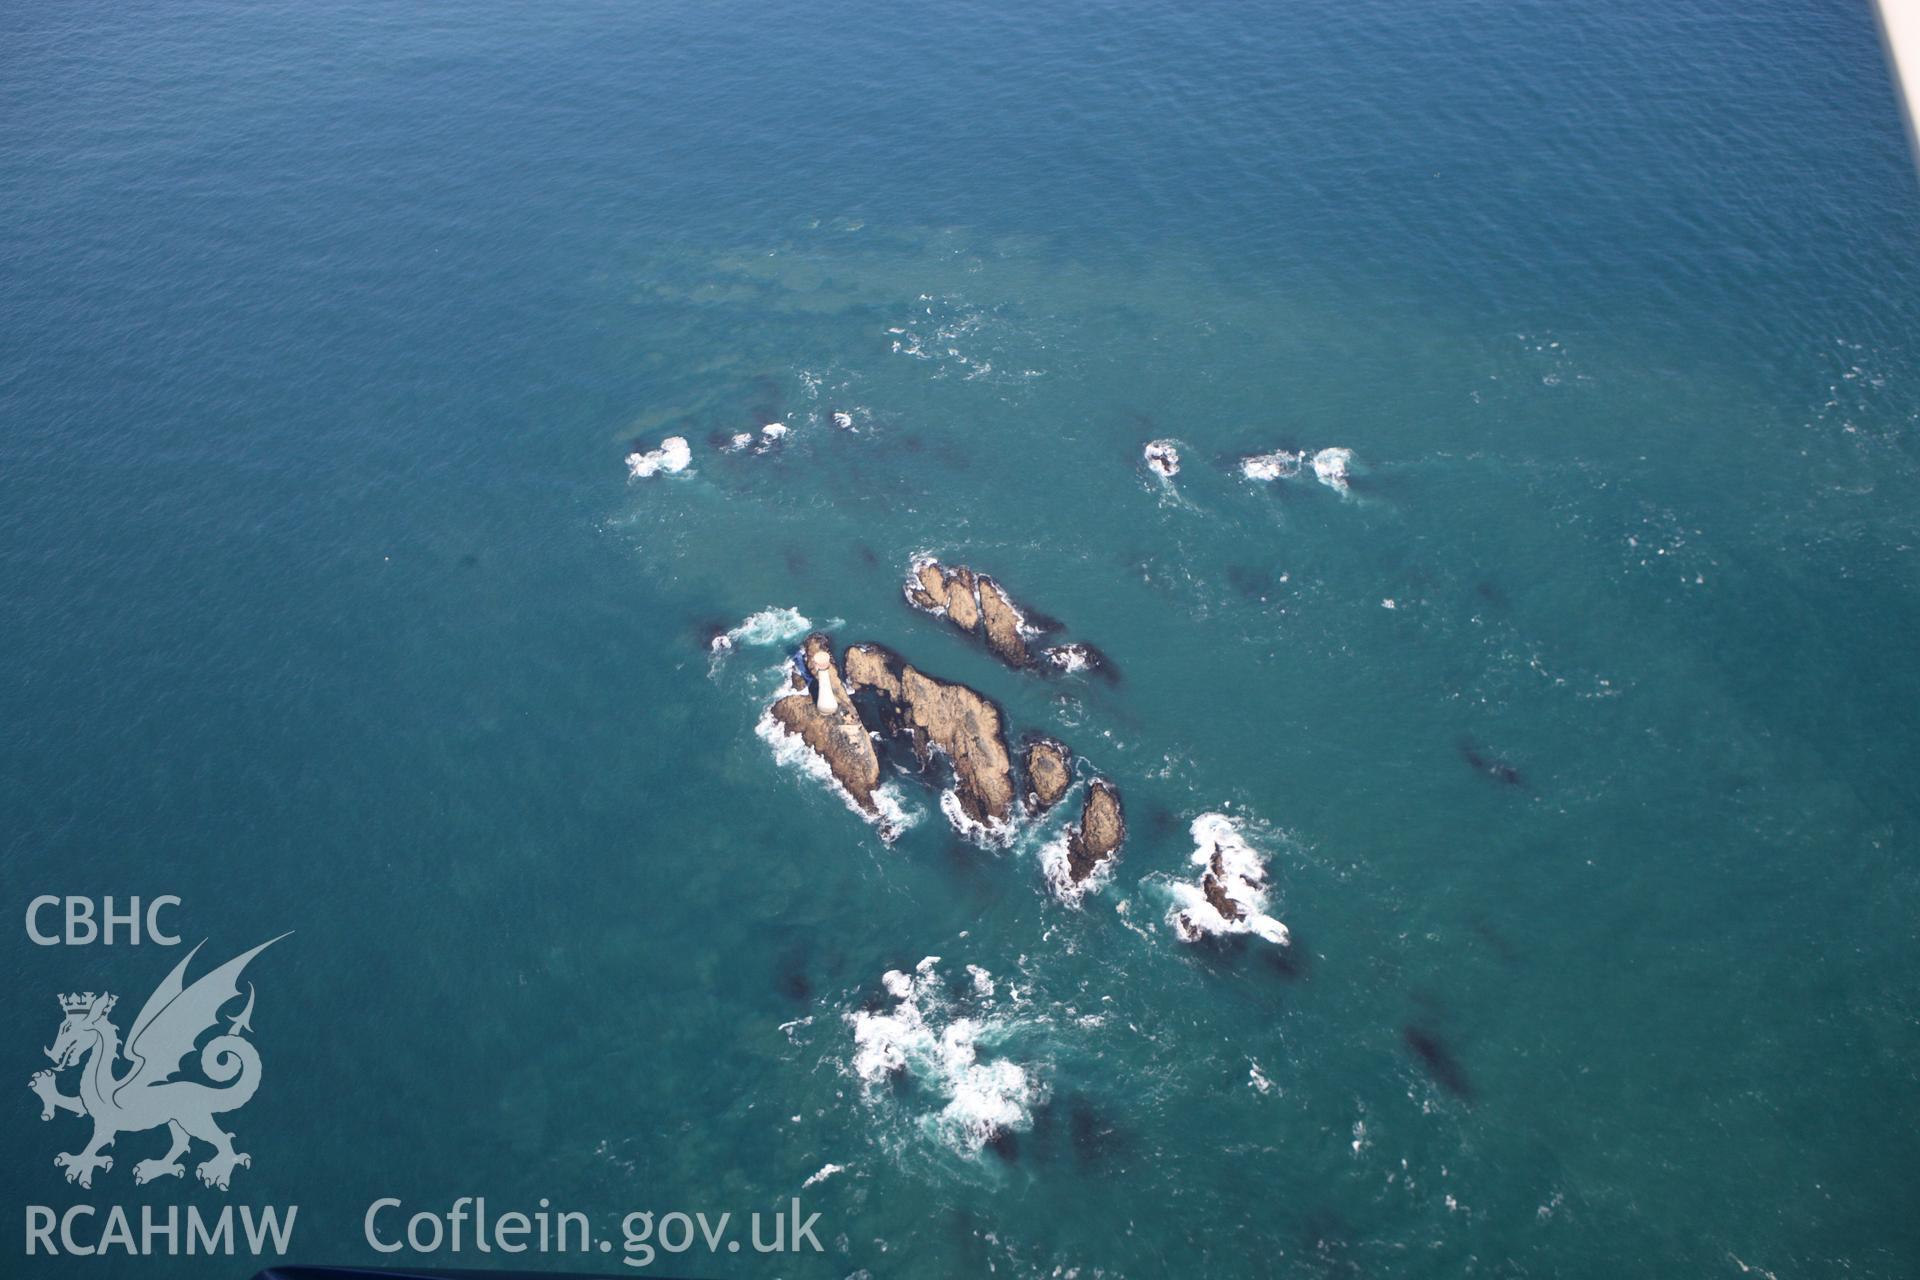 RCAHMW colour oblique photograph of The Smalls, west of Skomer Island. Taken by Toby Driver on 09/09/2010.